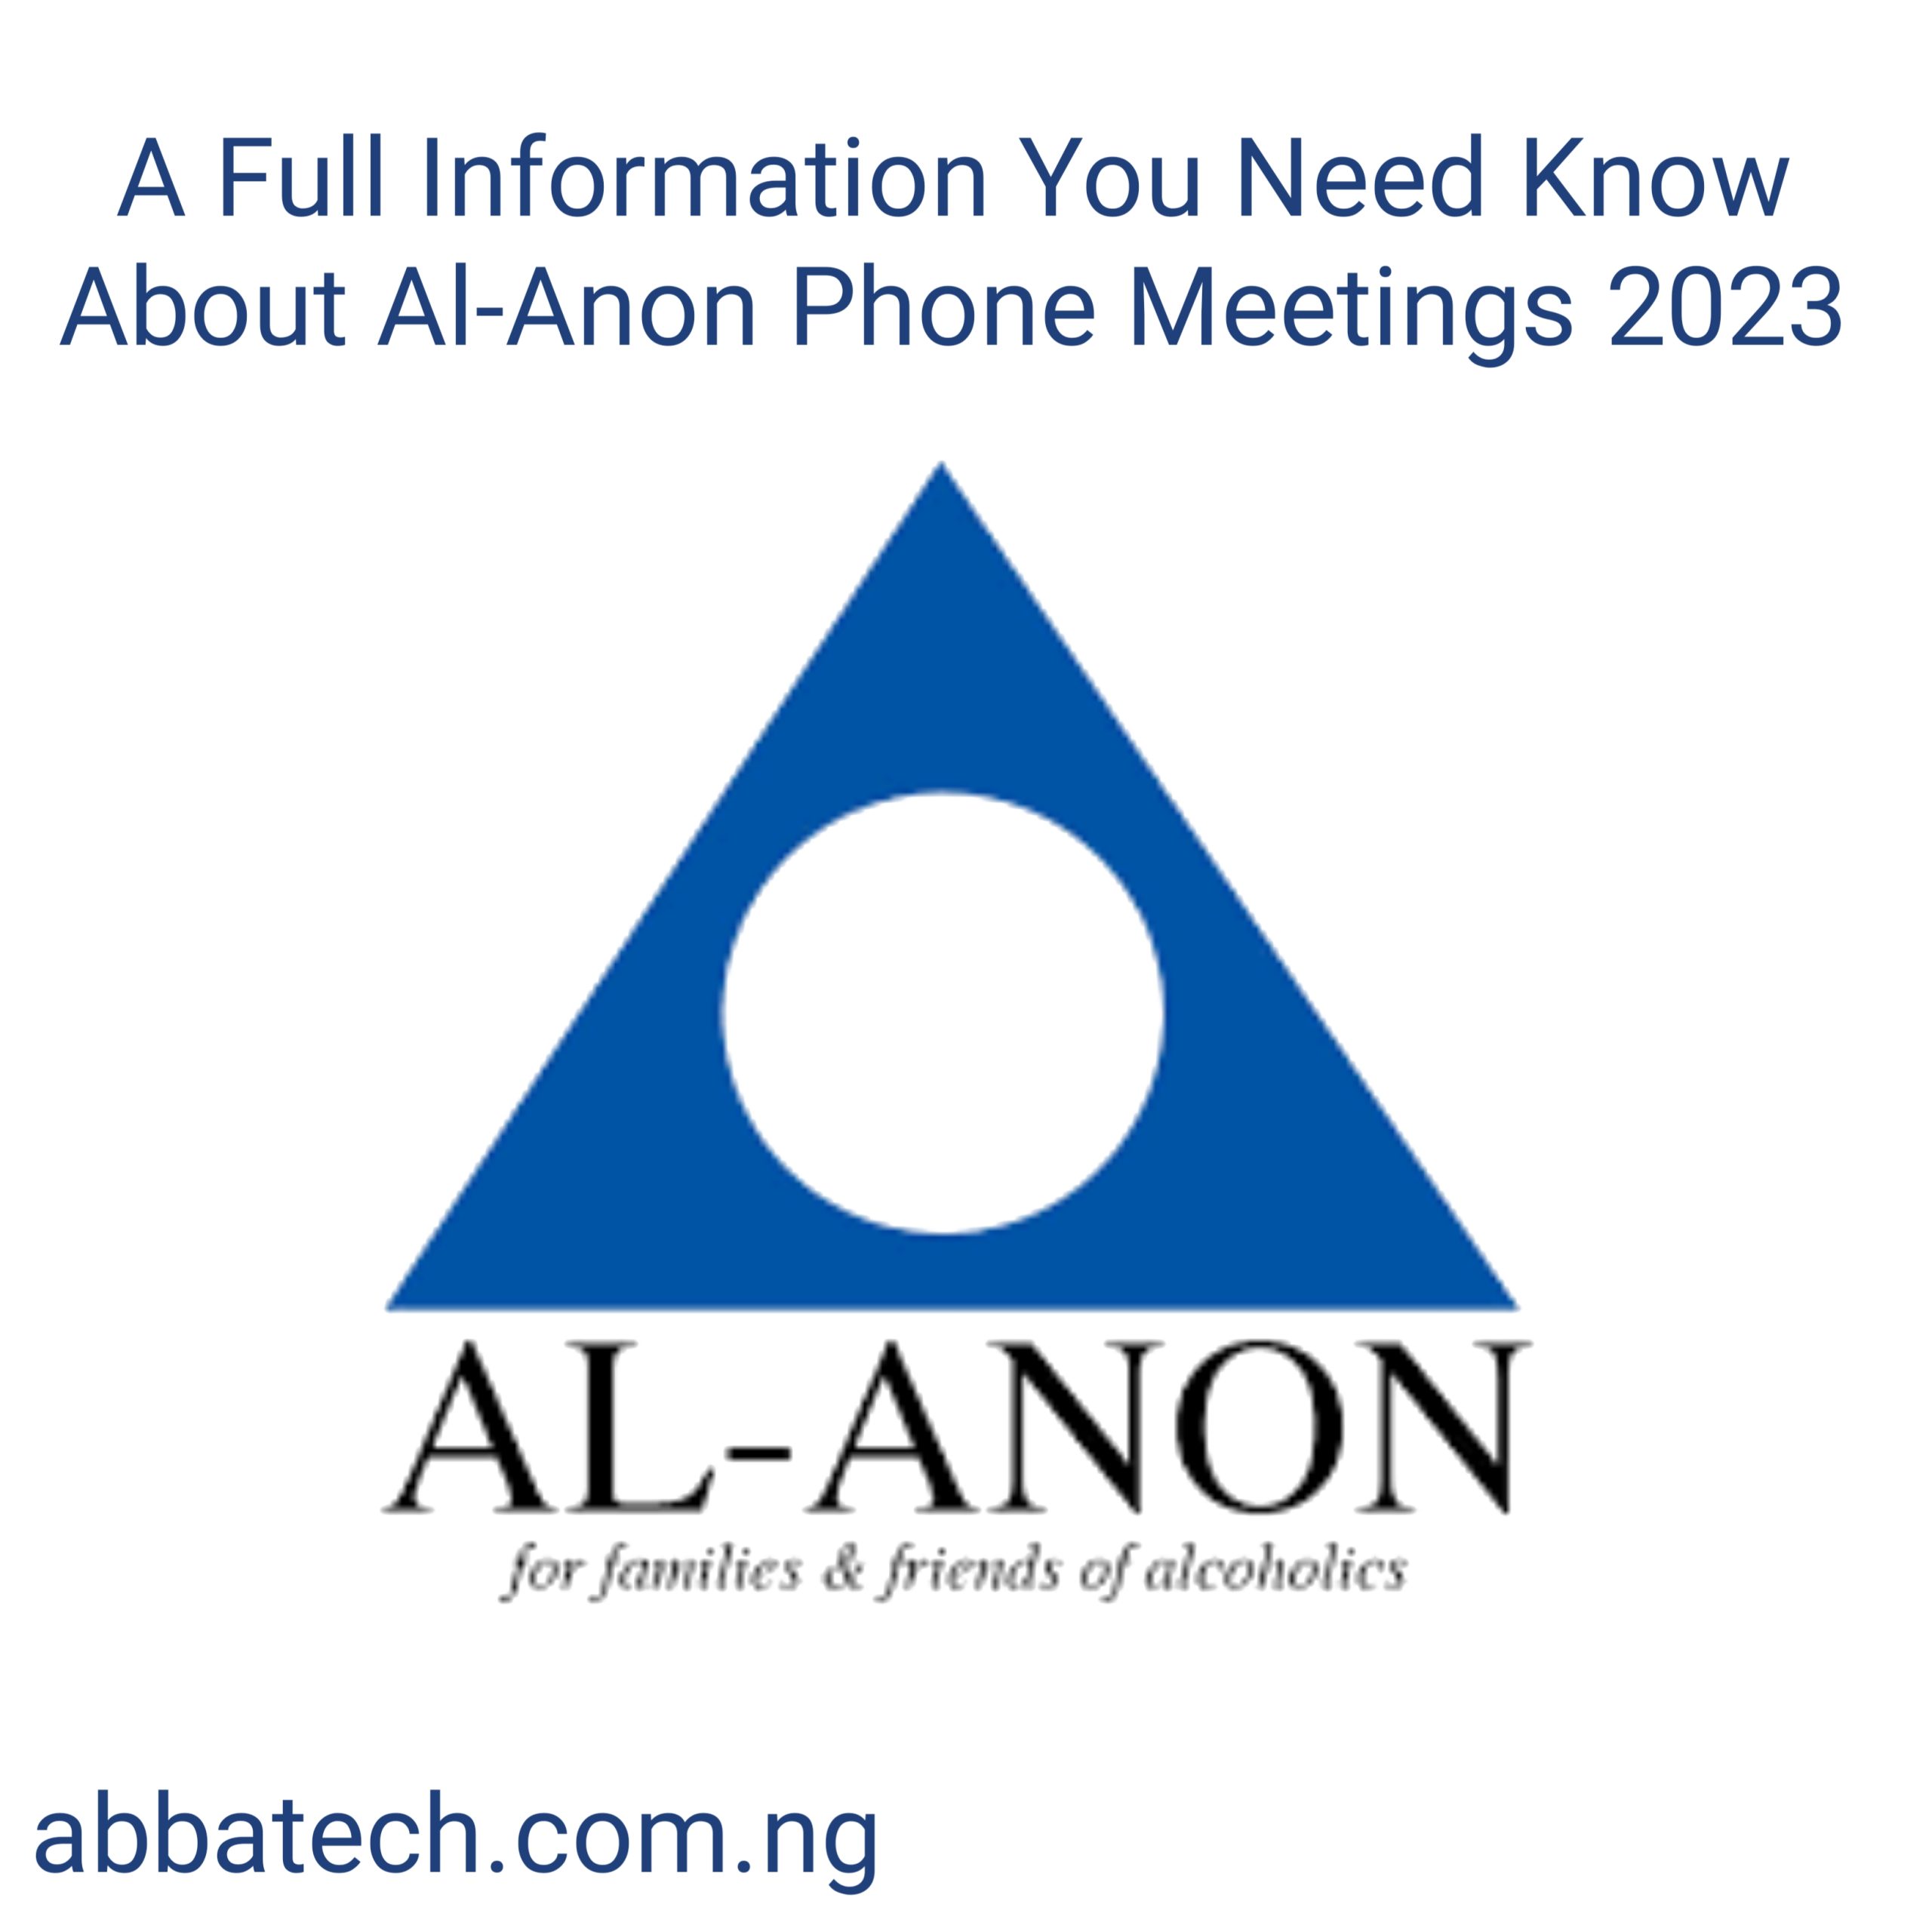 Al-Anon Phone Meetings Life-Changing Support: A Full Information You Need Know About Al-Anon Phone Meetings 2023